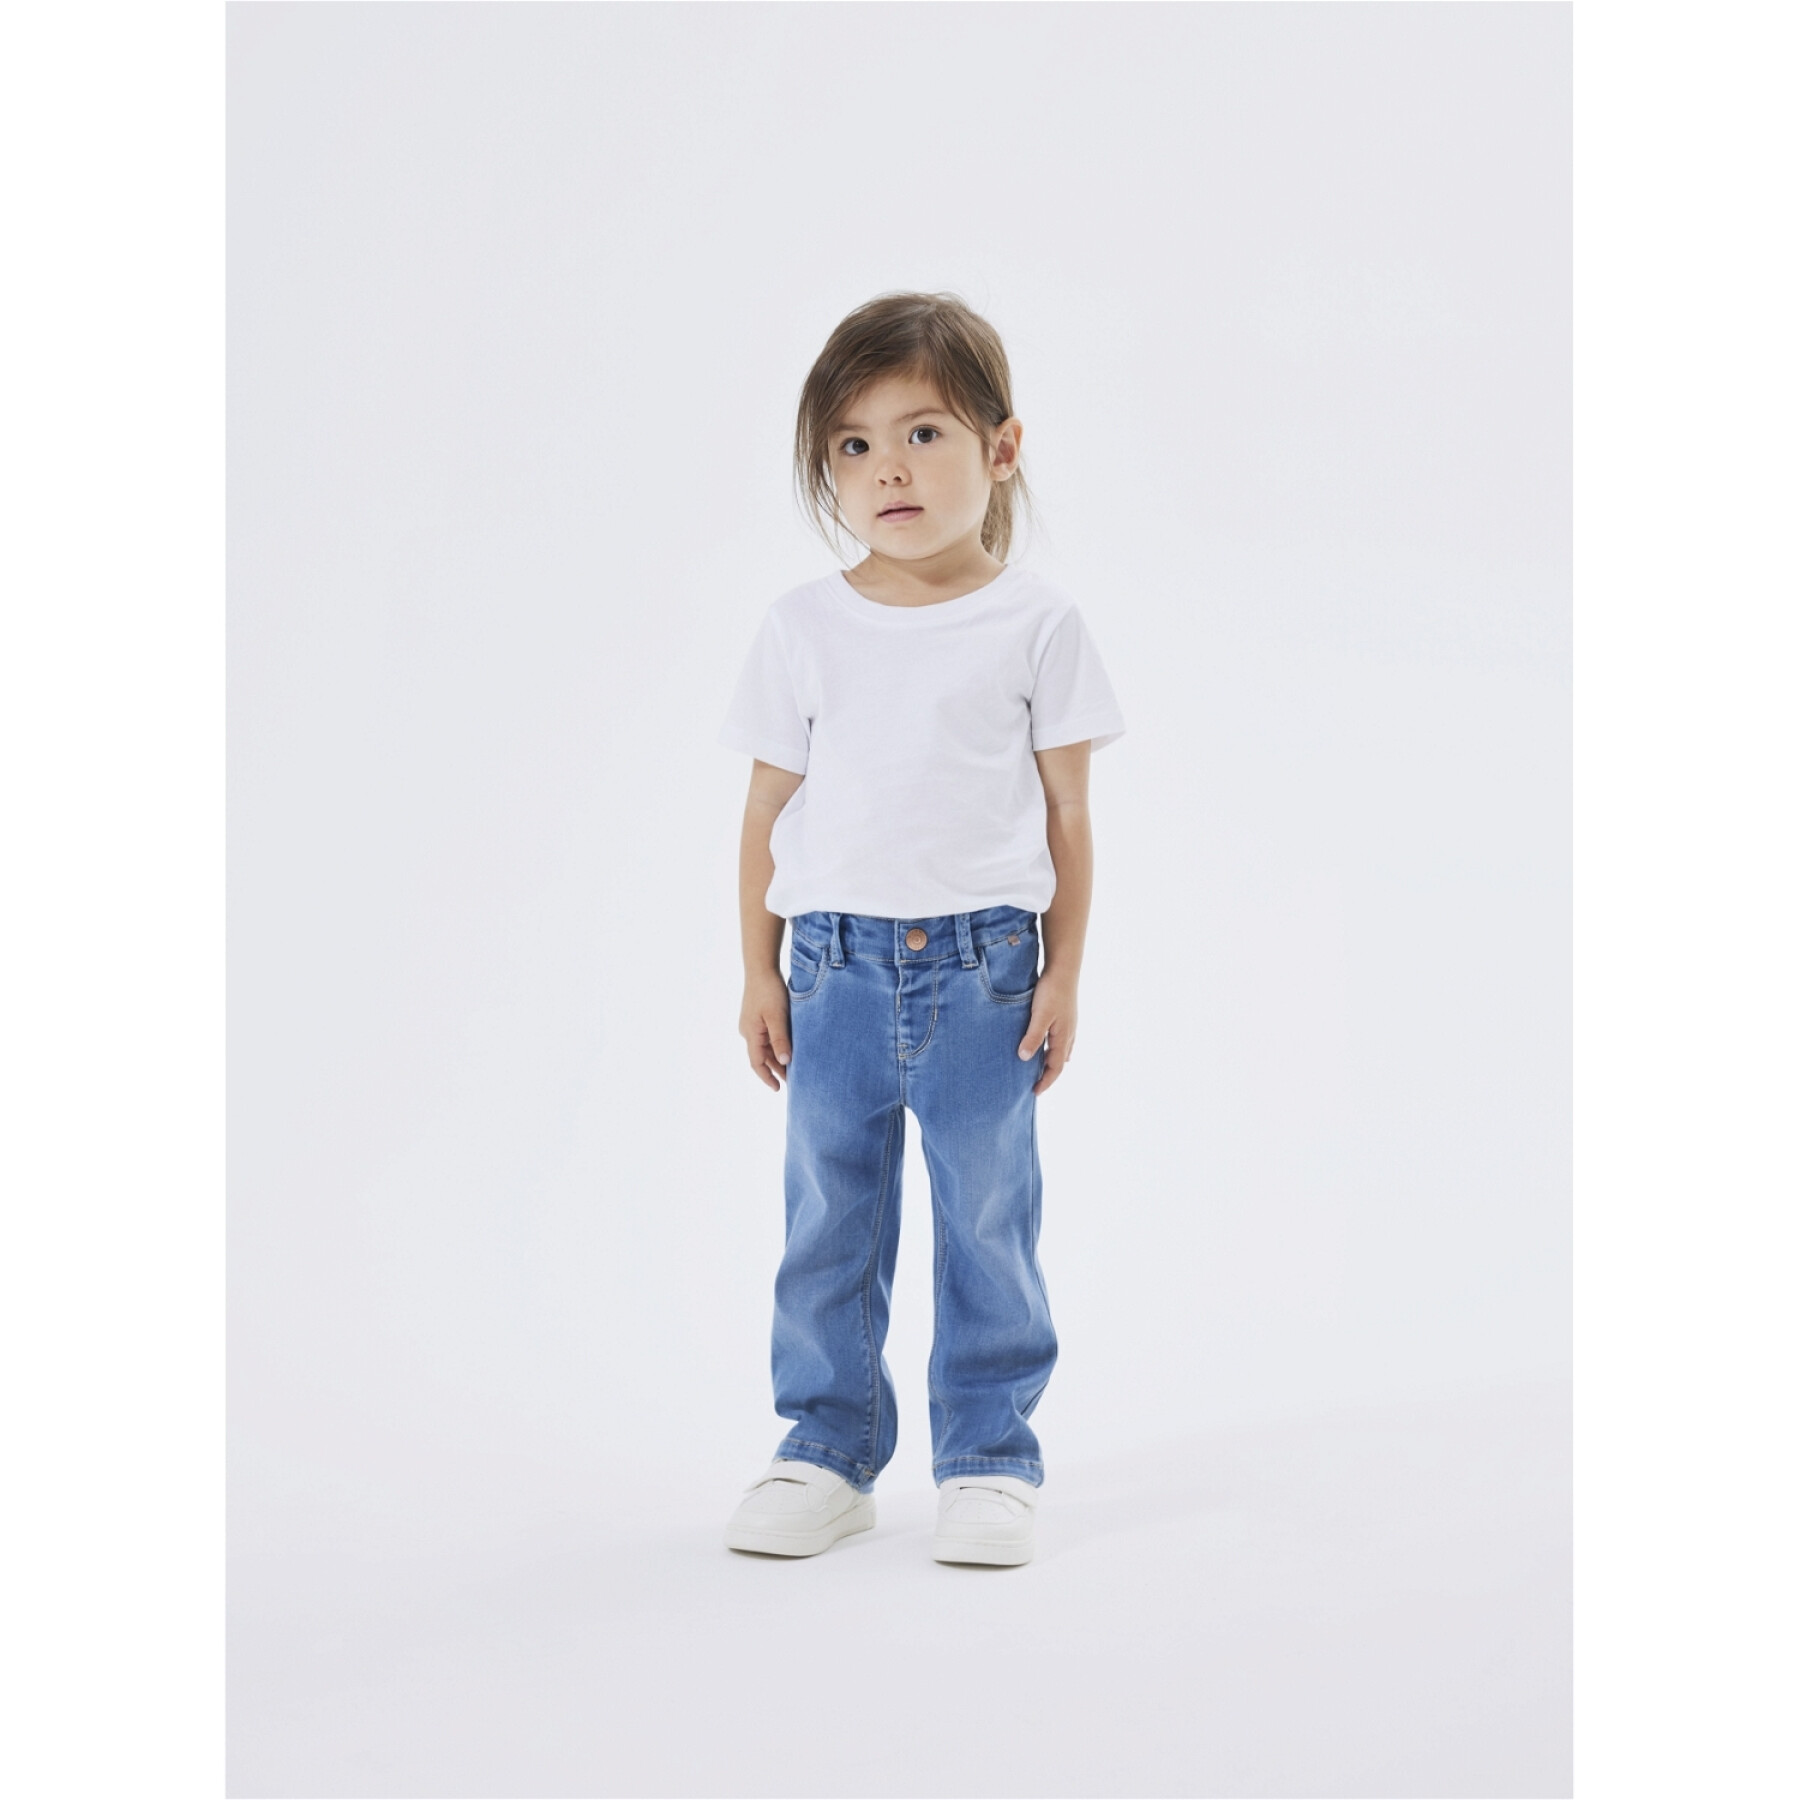 Jeans fille Name it Salli 8292-TO